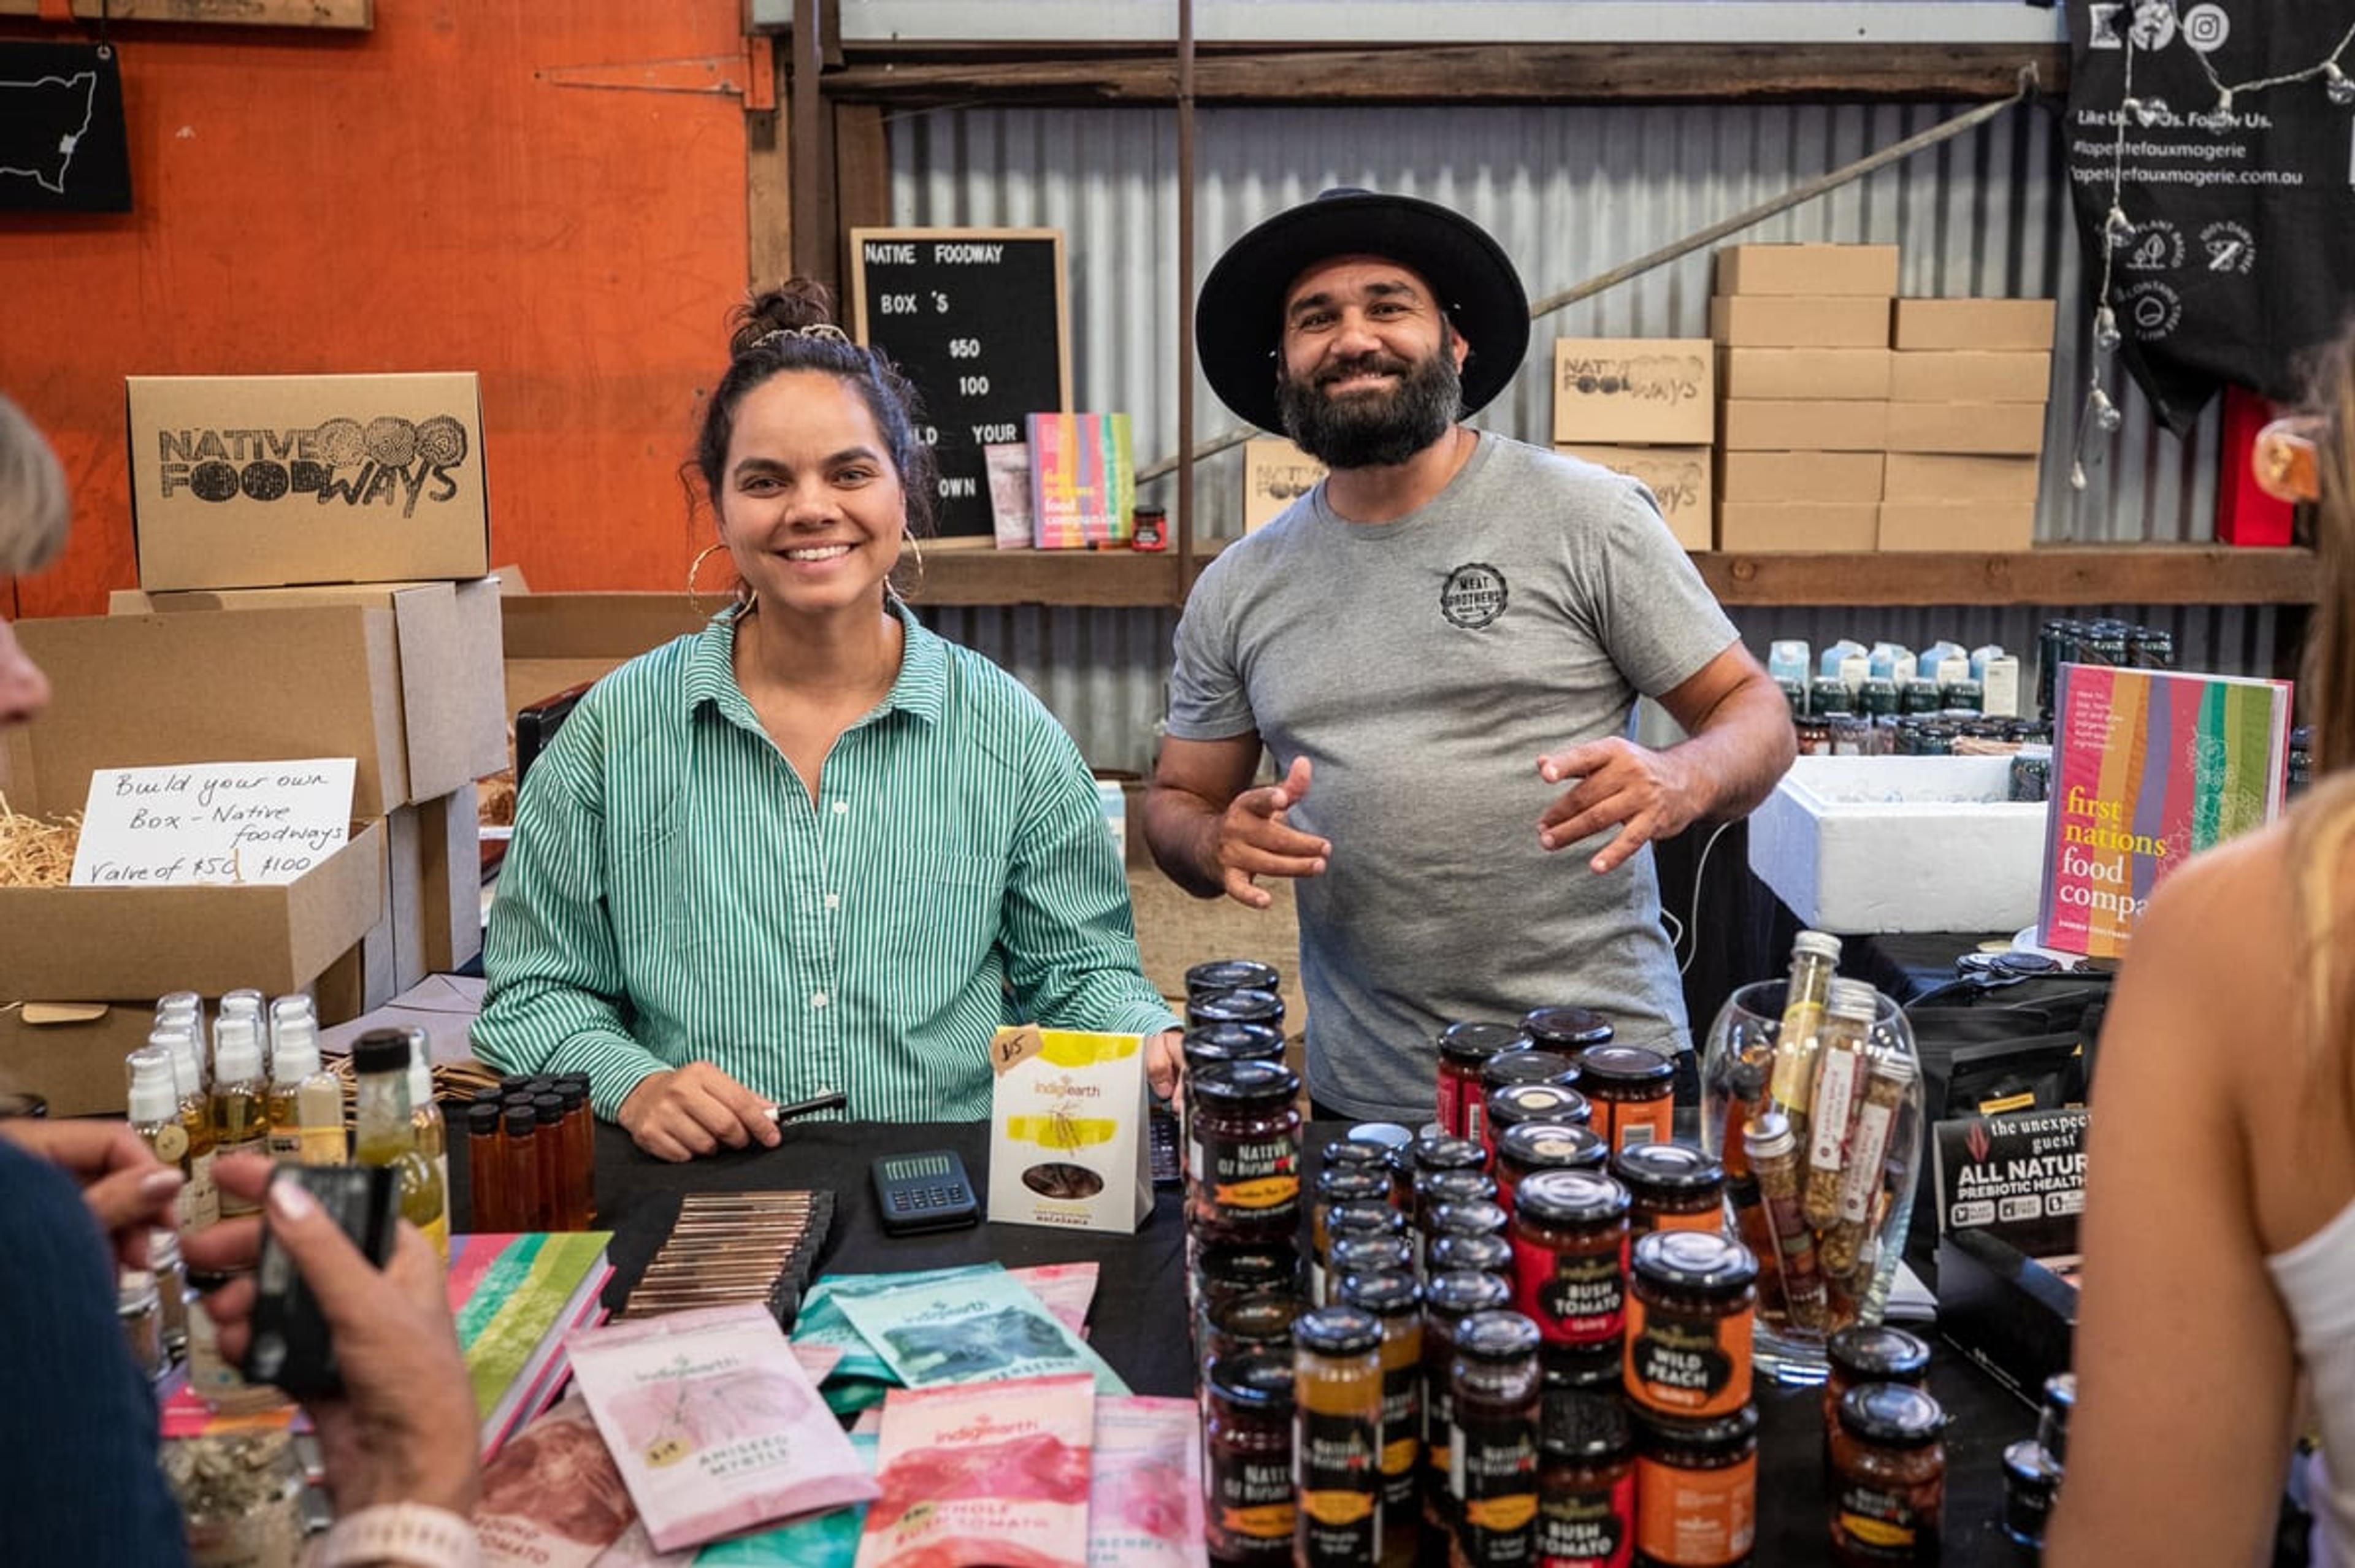 Gamilaraay Man and Director of Native Foods at Native Foodways - Corey Grech with Monica Mckenzie at the Carriageworks Farmers Makets.